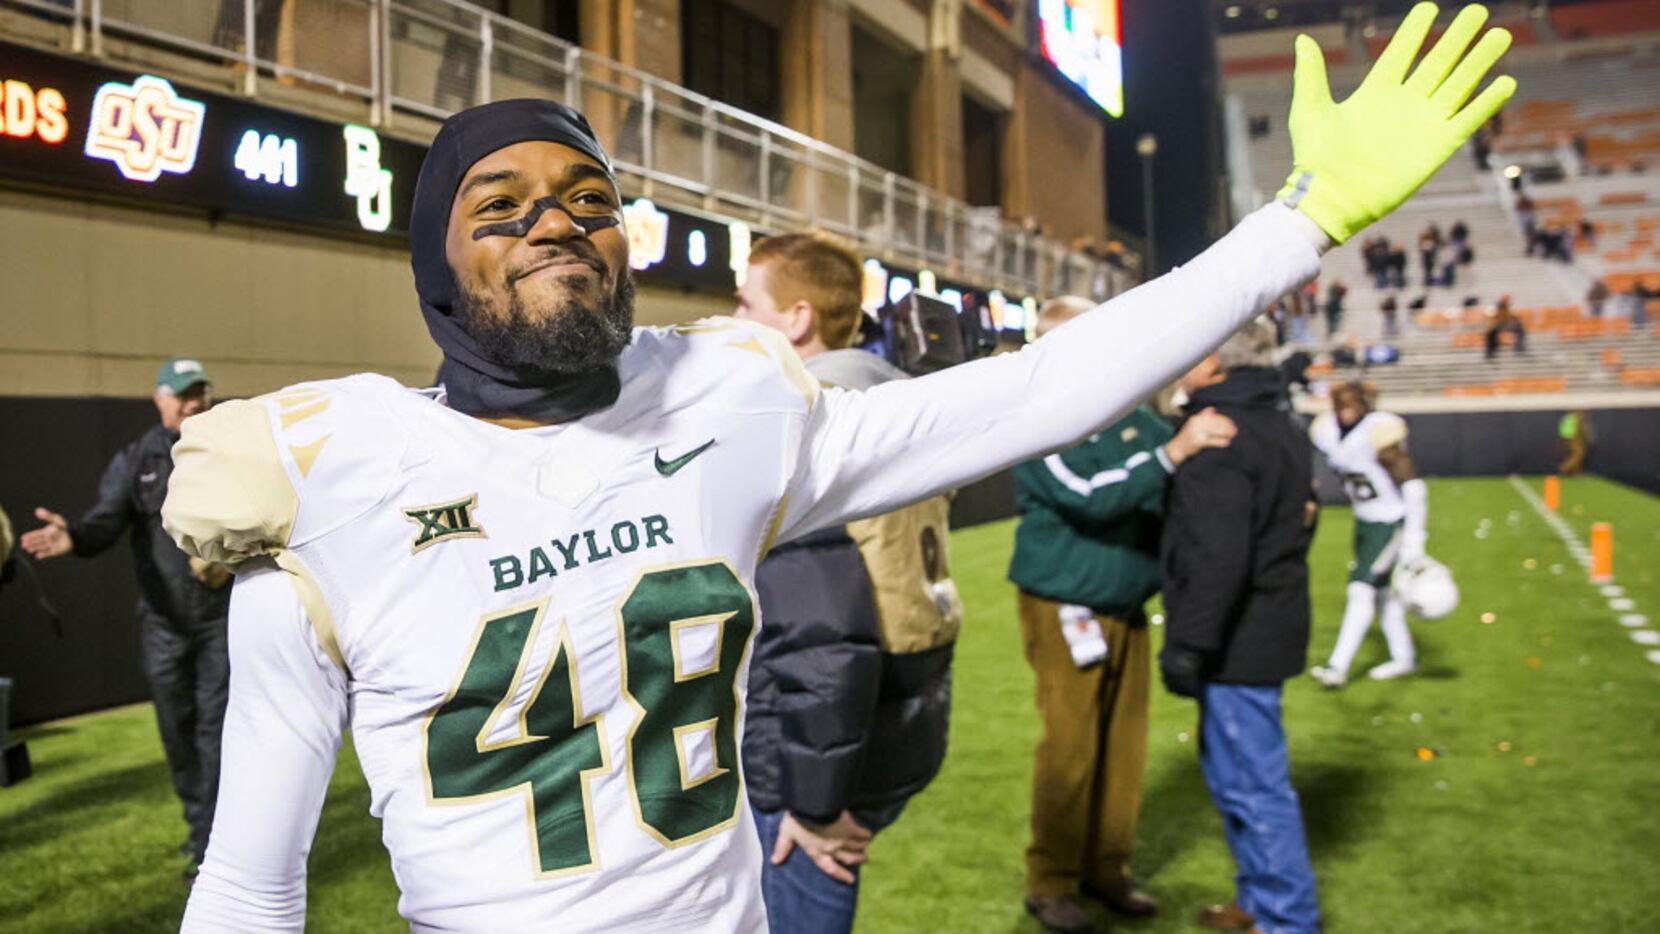 Baylor's Travon Blanchard waves to fans as he leaves the field after a victory over Oklahoma...